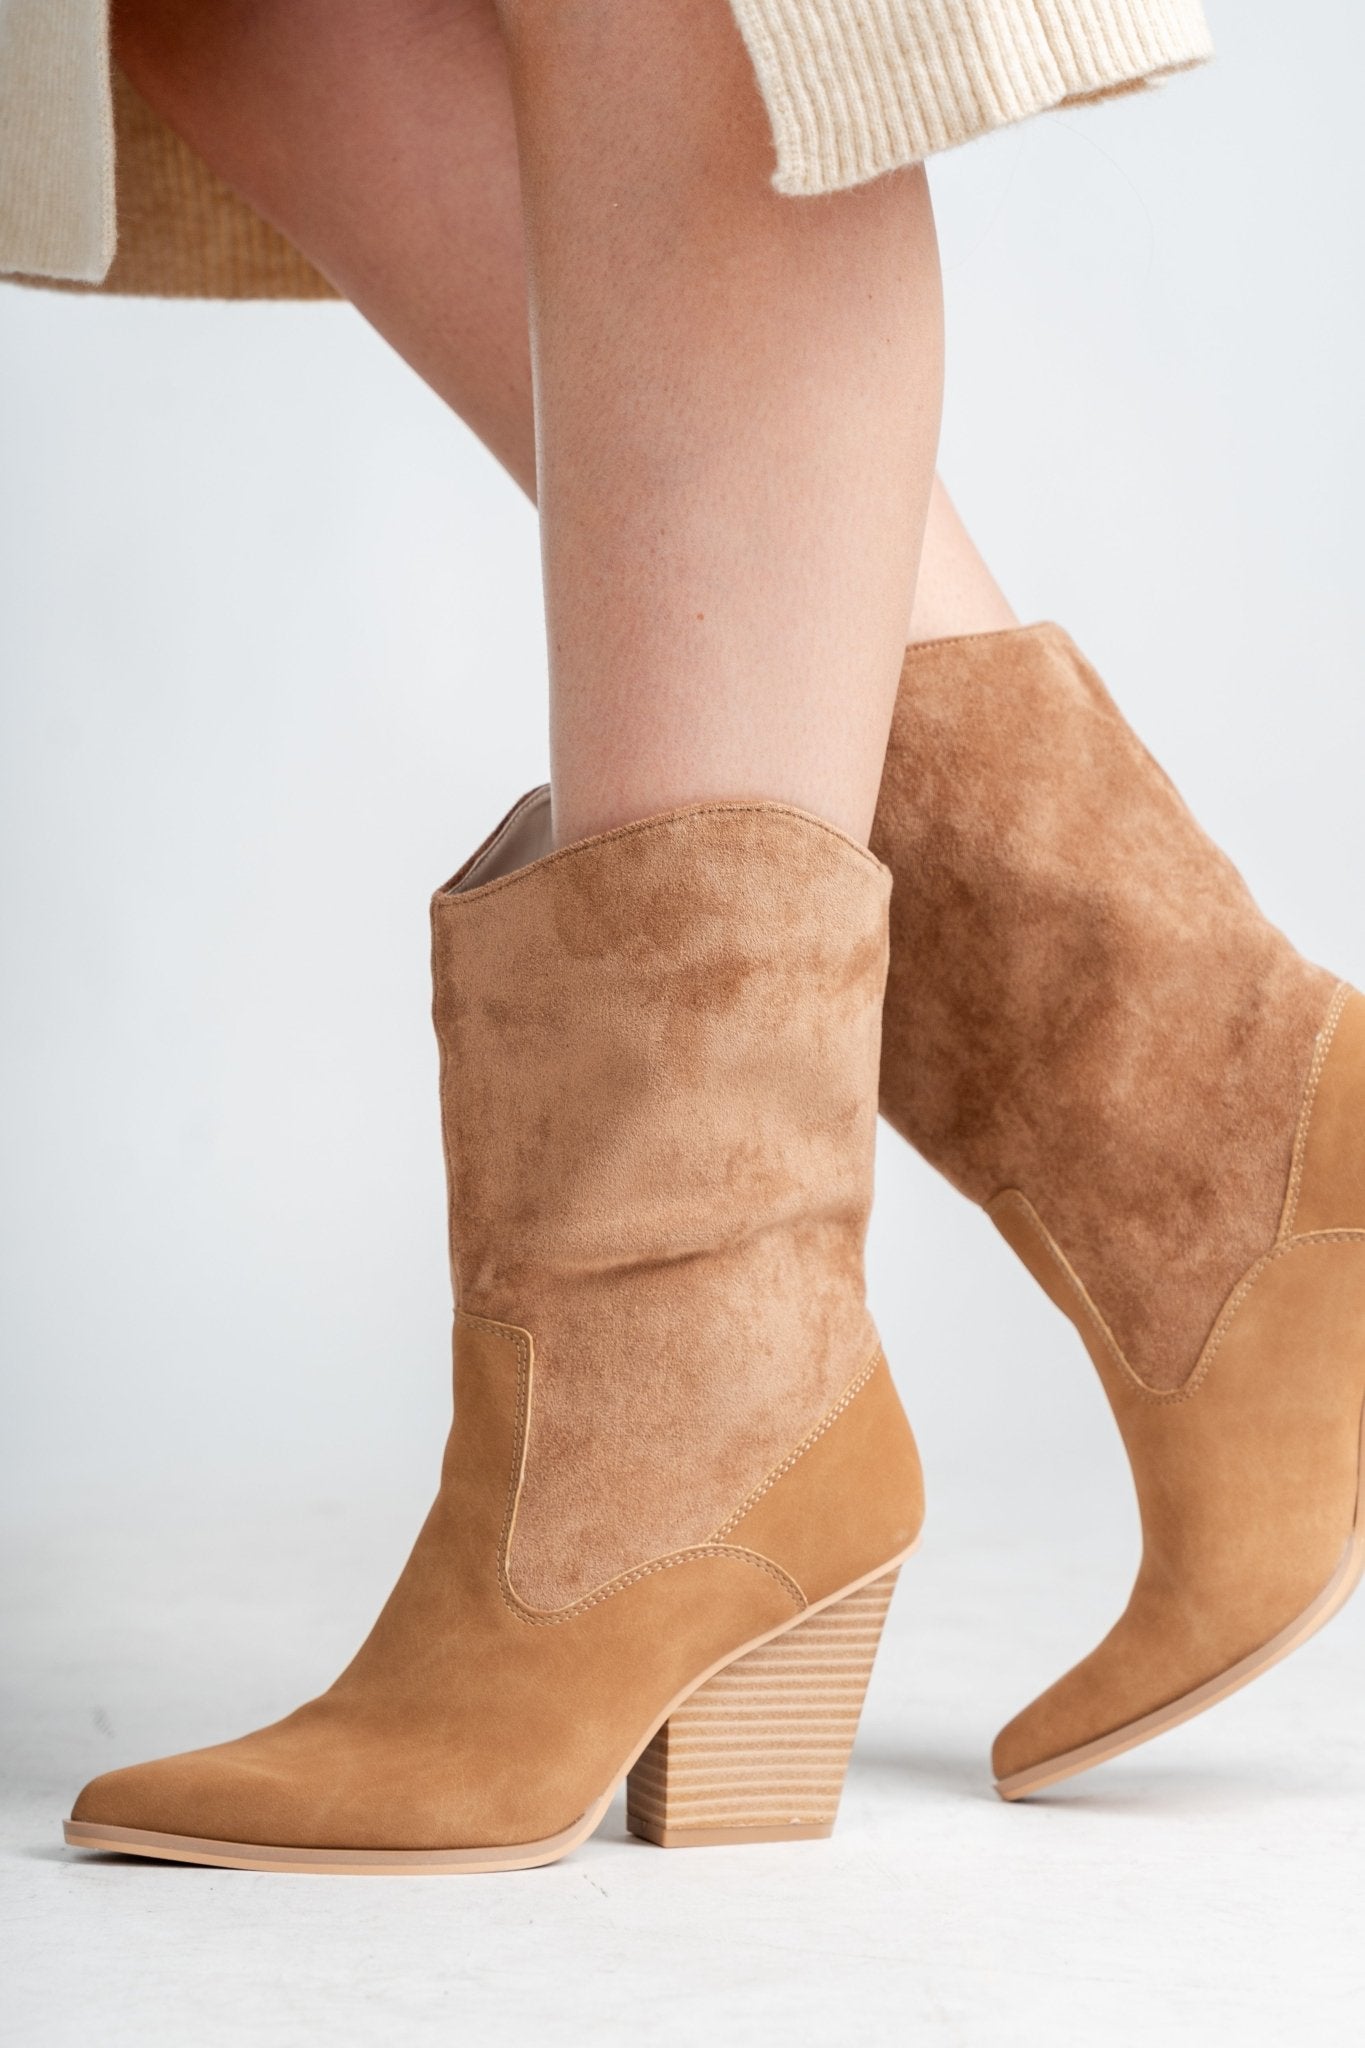 Marseille loose fit boot camel - Affordable shoes - Boutique Shoes at Lush Fashion Lounge Boutique in Oklahoma City